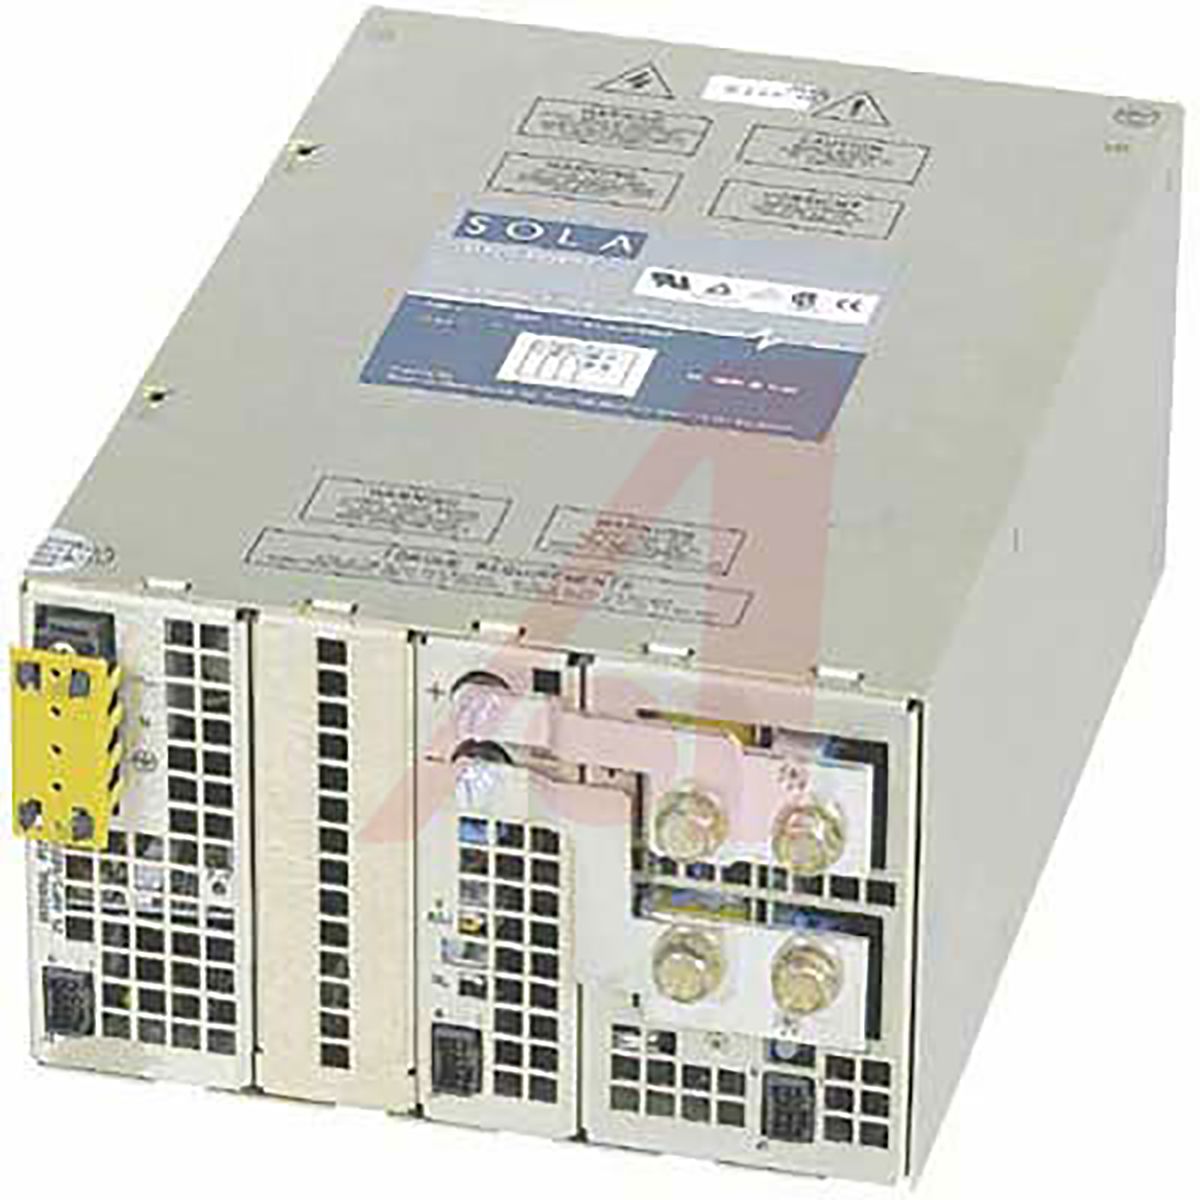 SolaHD Switching Power Supply, 24V dc, 62.4A, 1.5kW, 1 Output